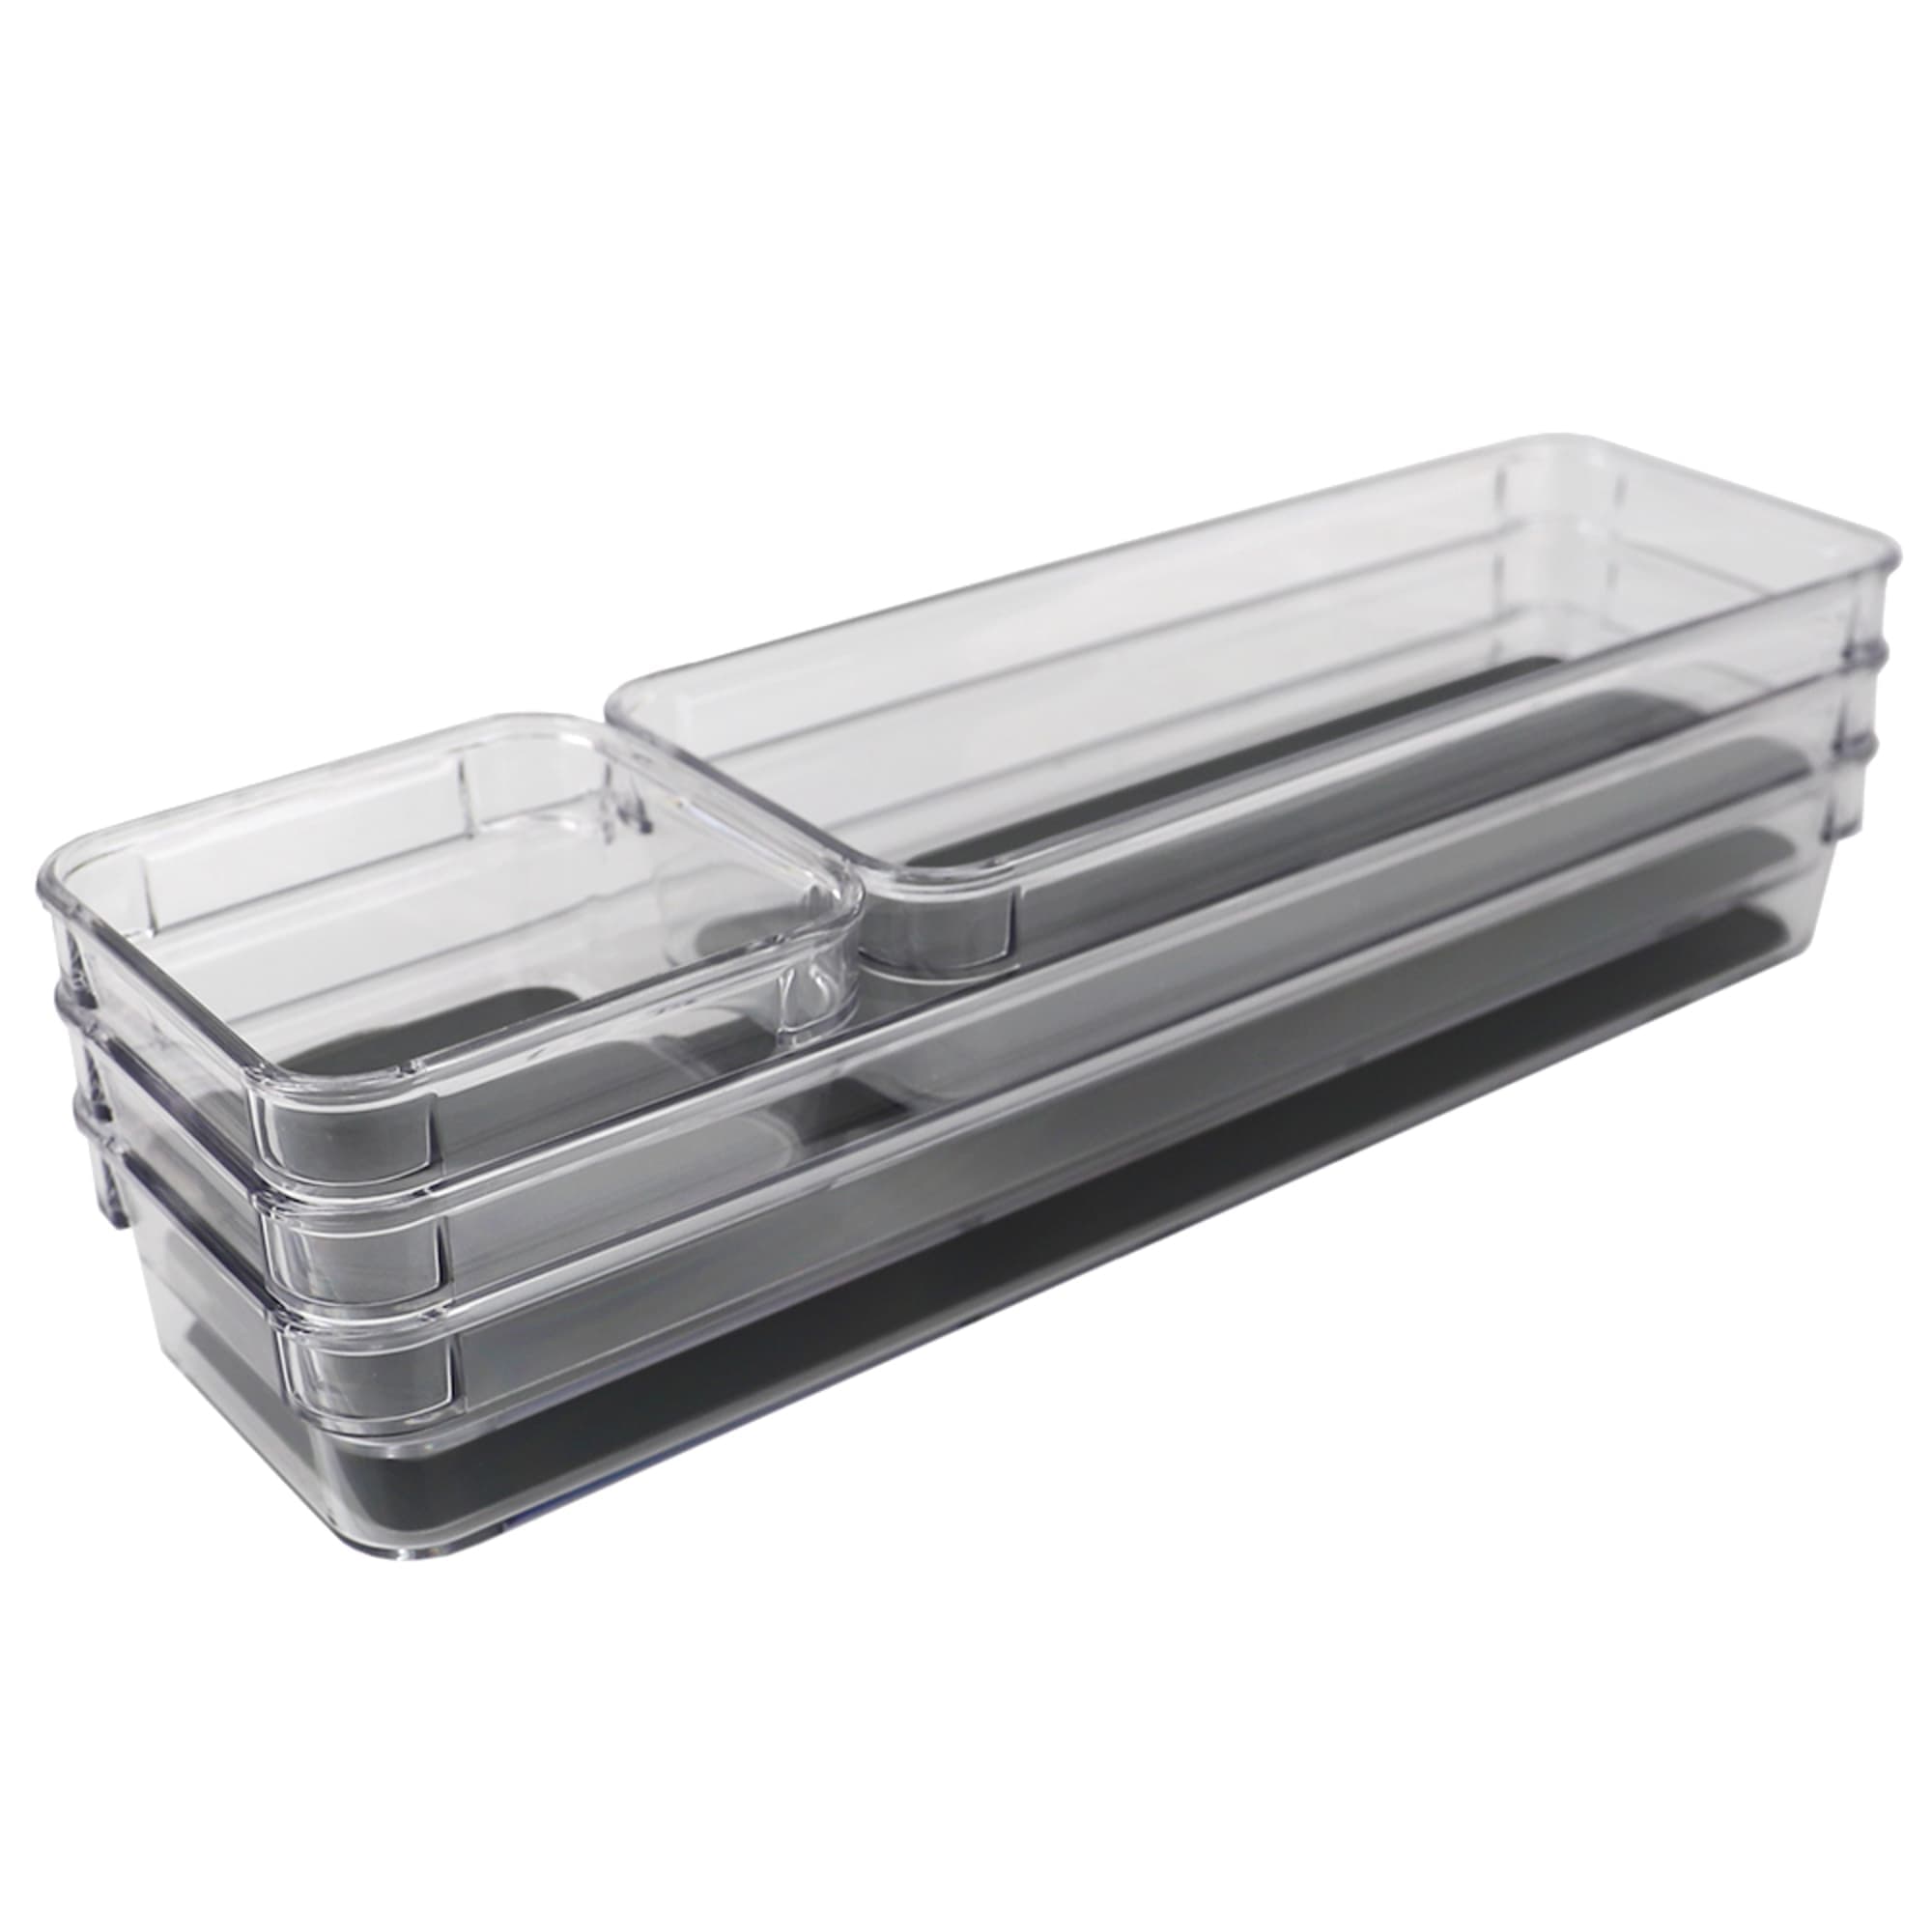 Home Basics 4 Compartment Rubber Lined Plastic Drawer Organizer, (Set of 4), Grey $5.00 EACH, CASE PACK OF 12